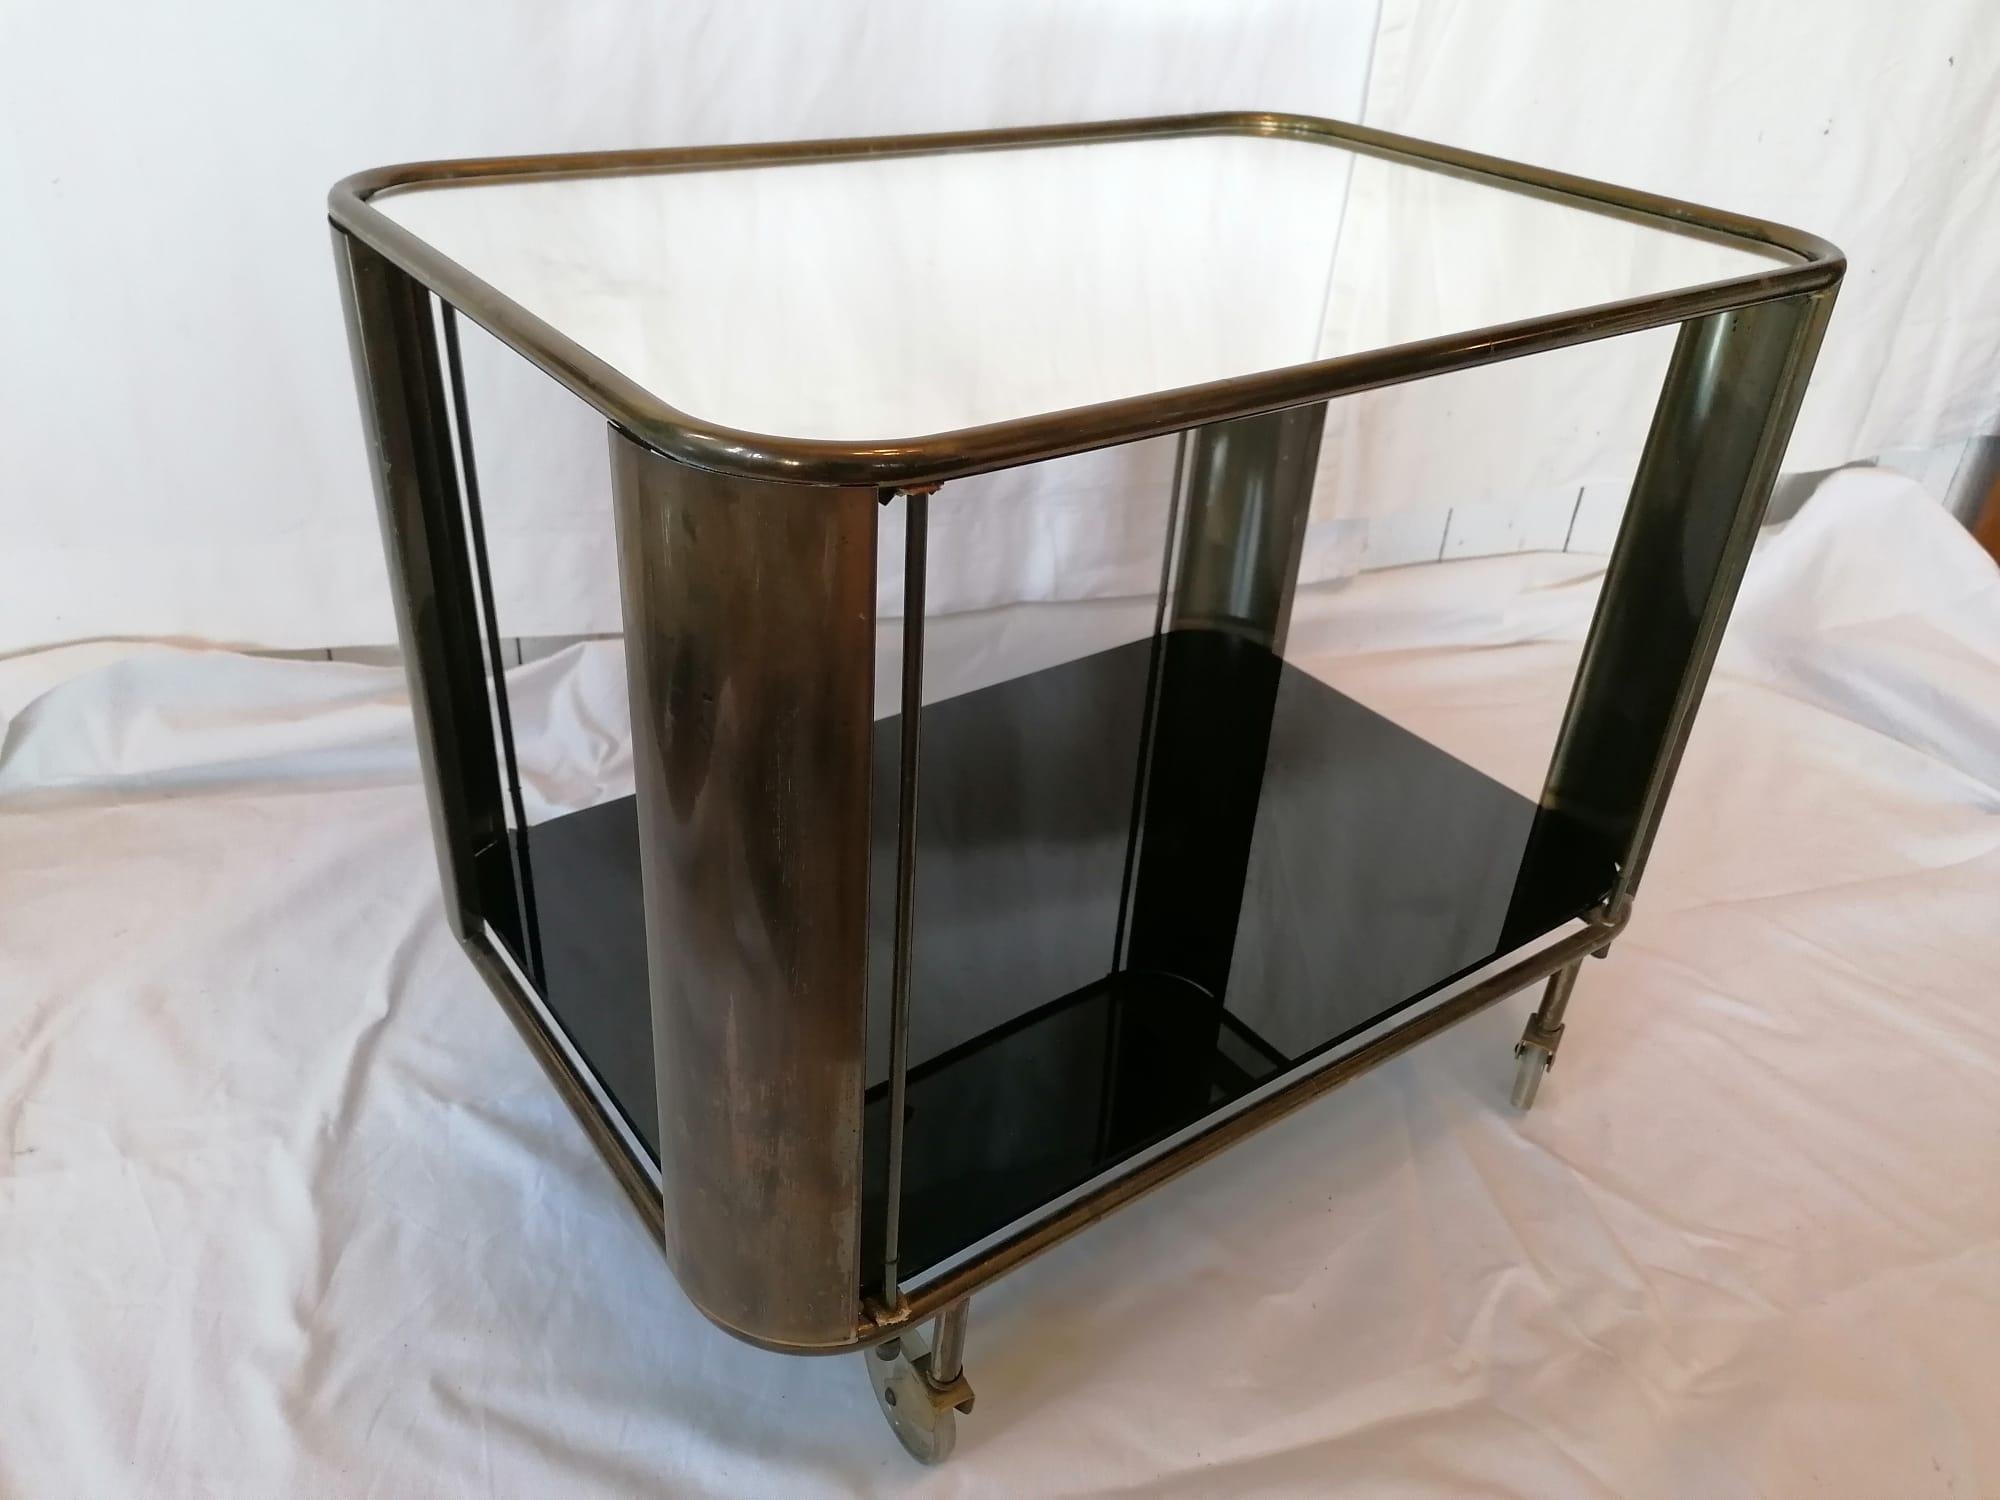 Art Deco bar cart, hardwood frame with plywood with black glass button and mirror top on glass (plexiglass?) wheels. Made in Austria in the late 1930s. 